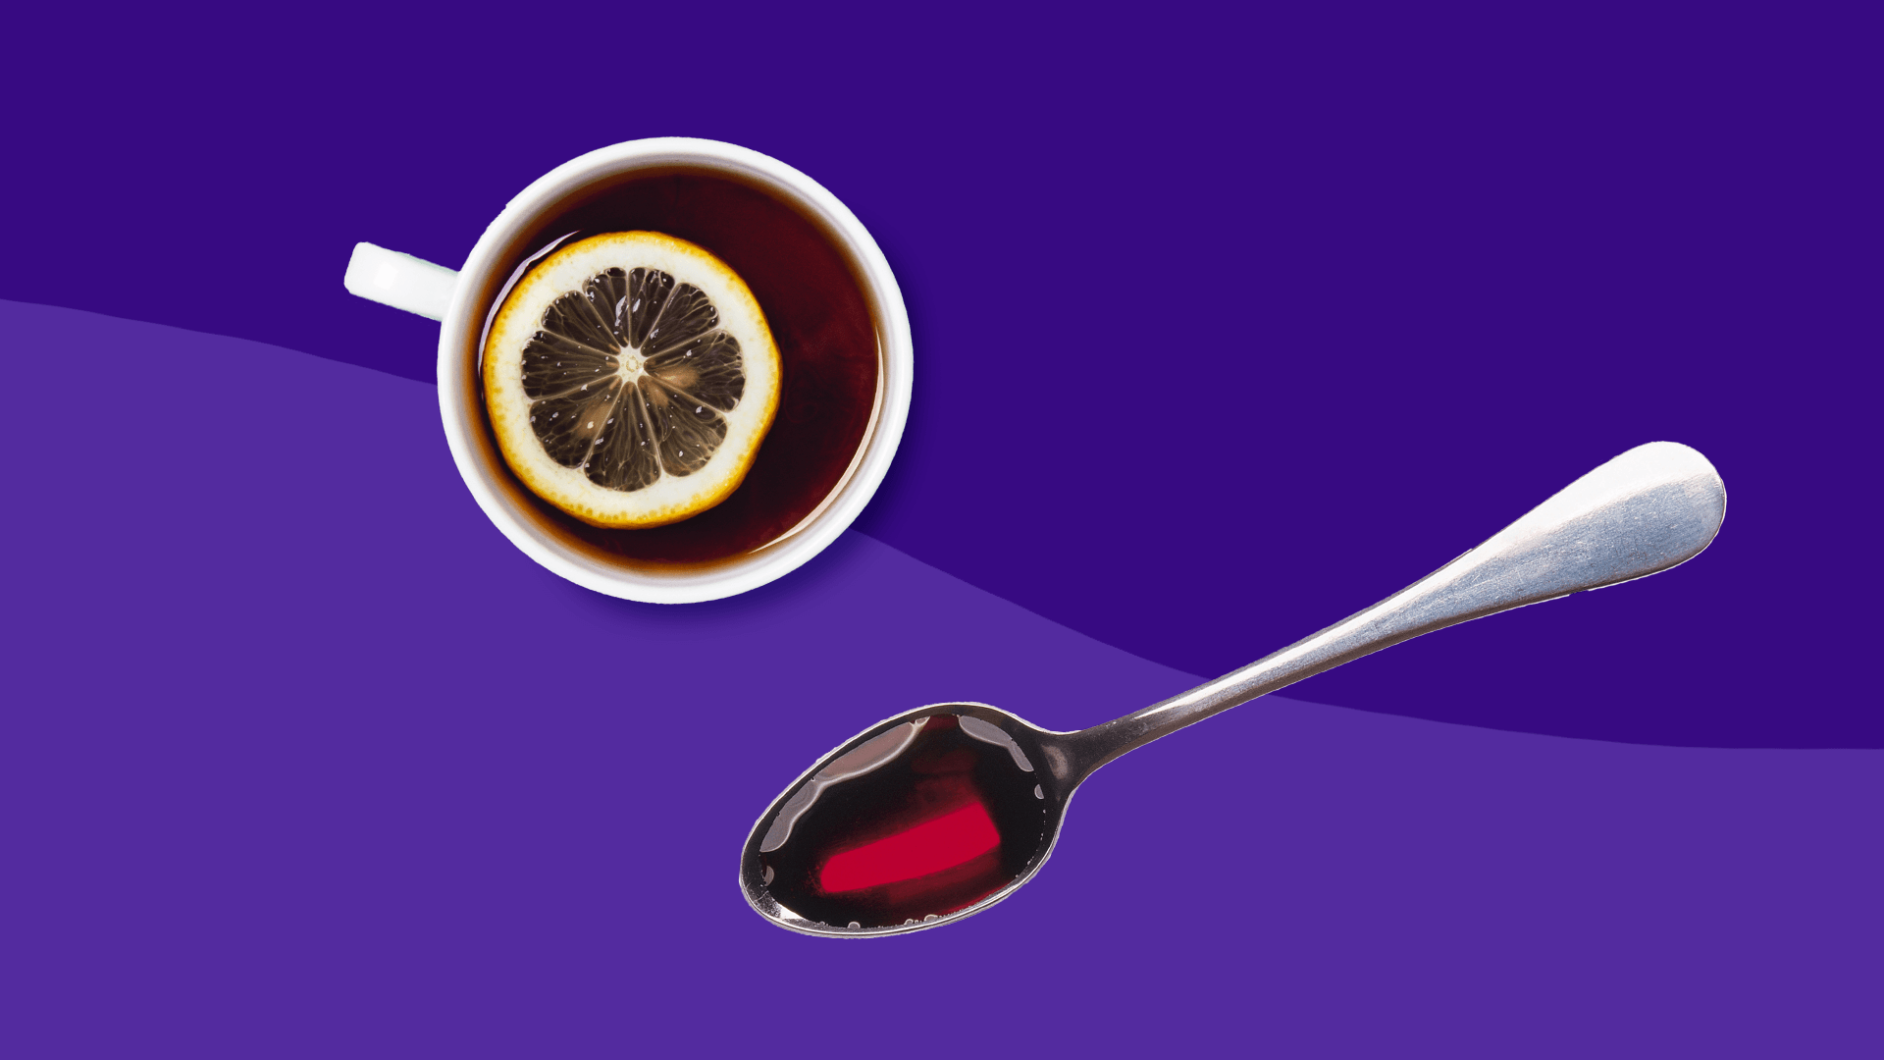 Cup of tea and cough syrup spoon: Best Cold Medicines